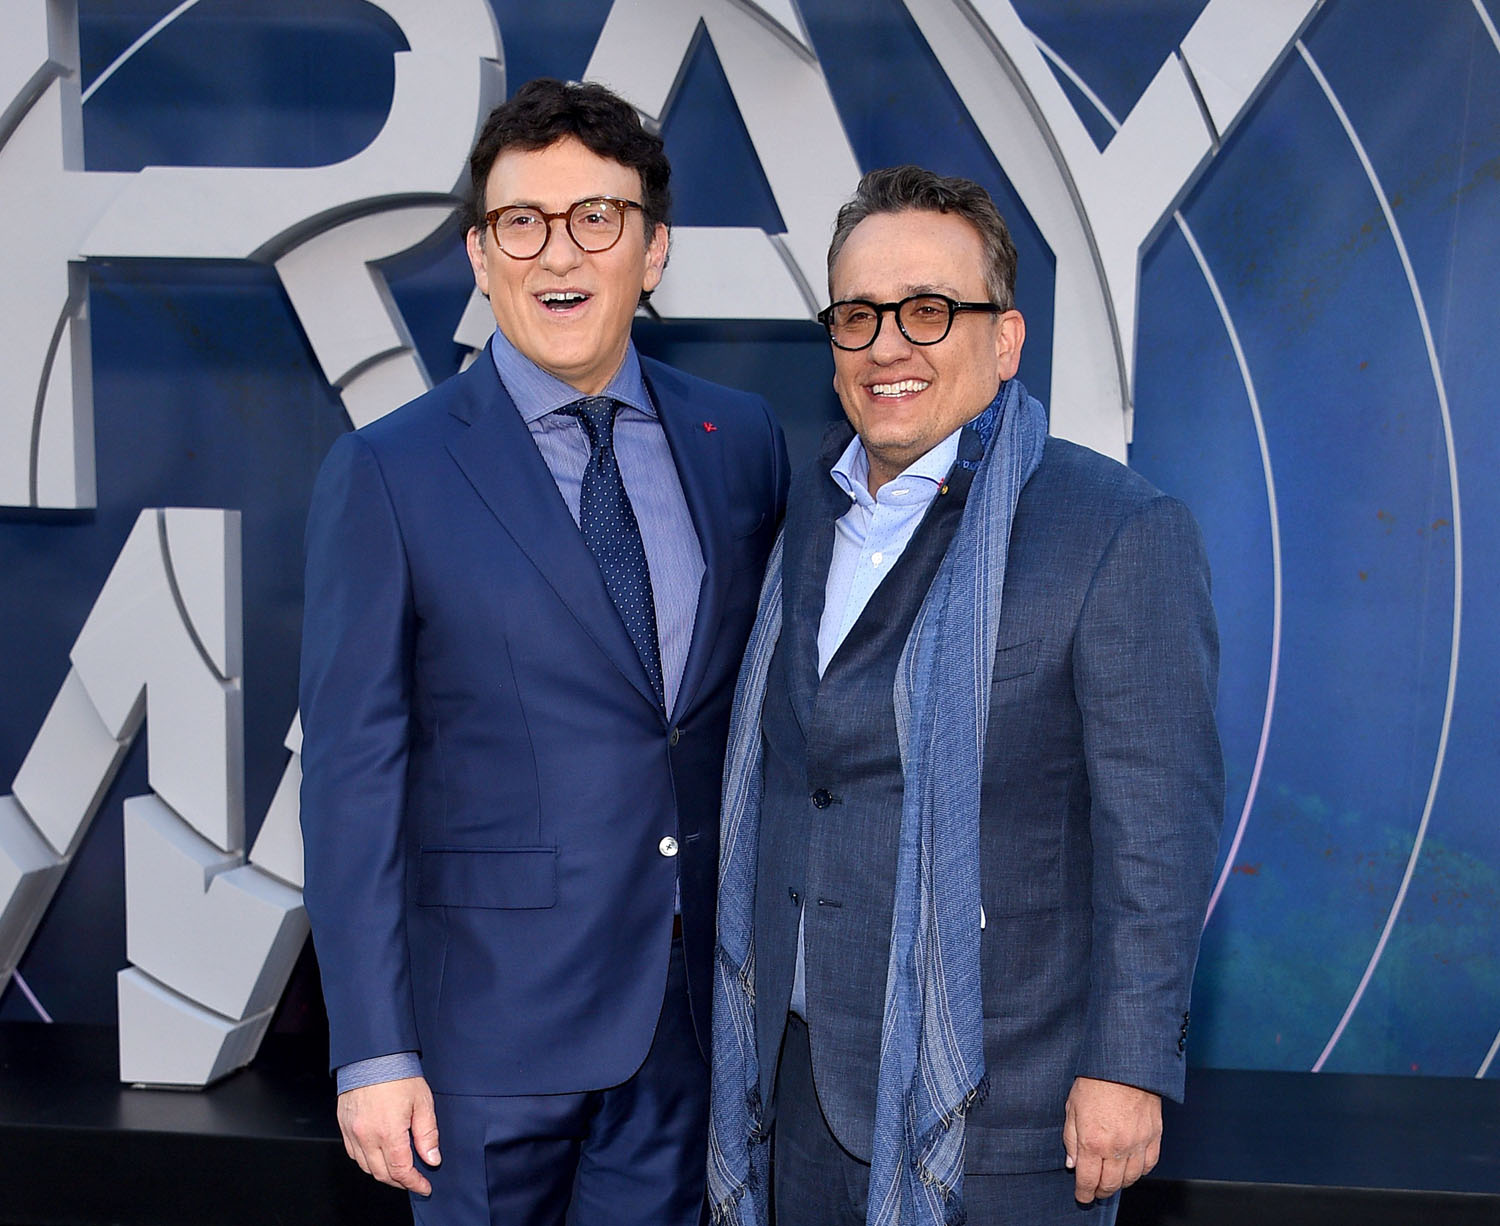 Joe and Anthony Russo's comments on Netflix, movie theaters, and ...